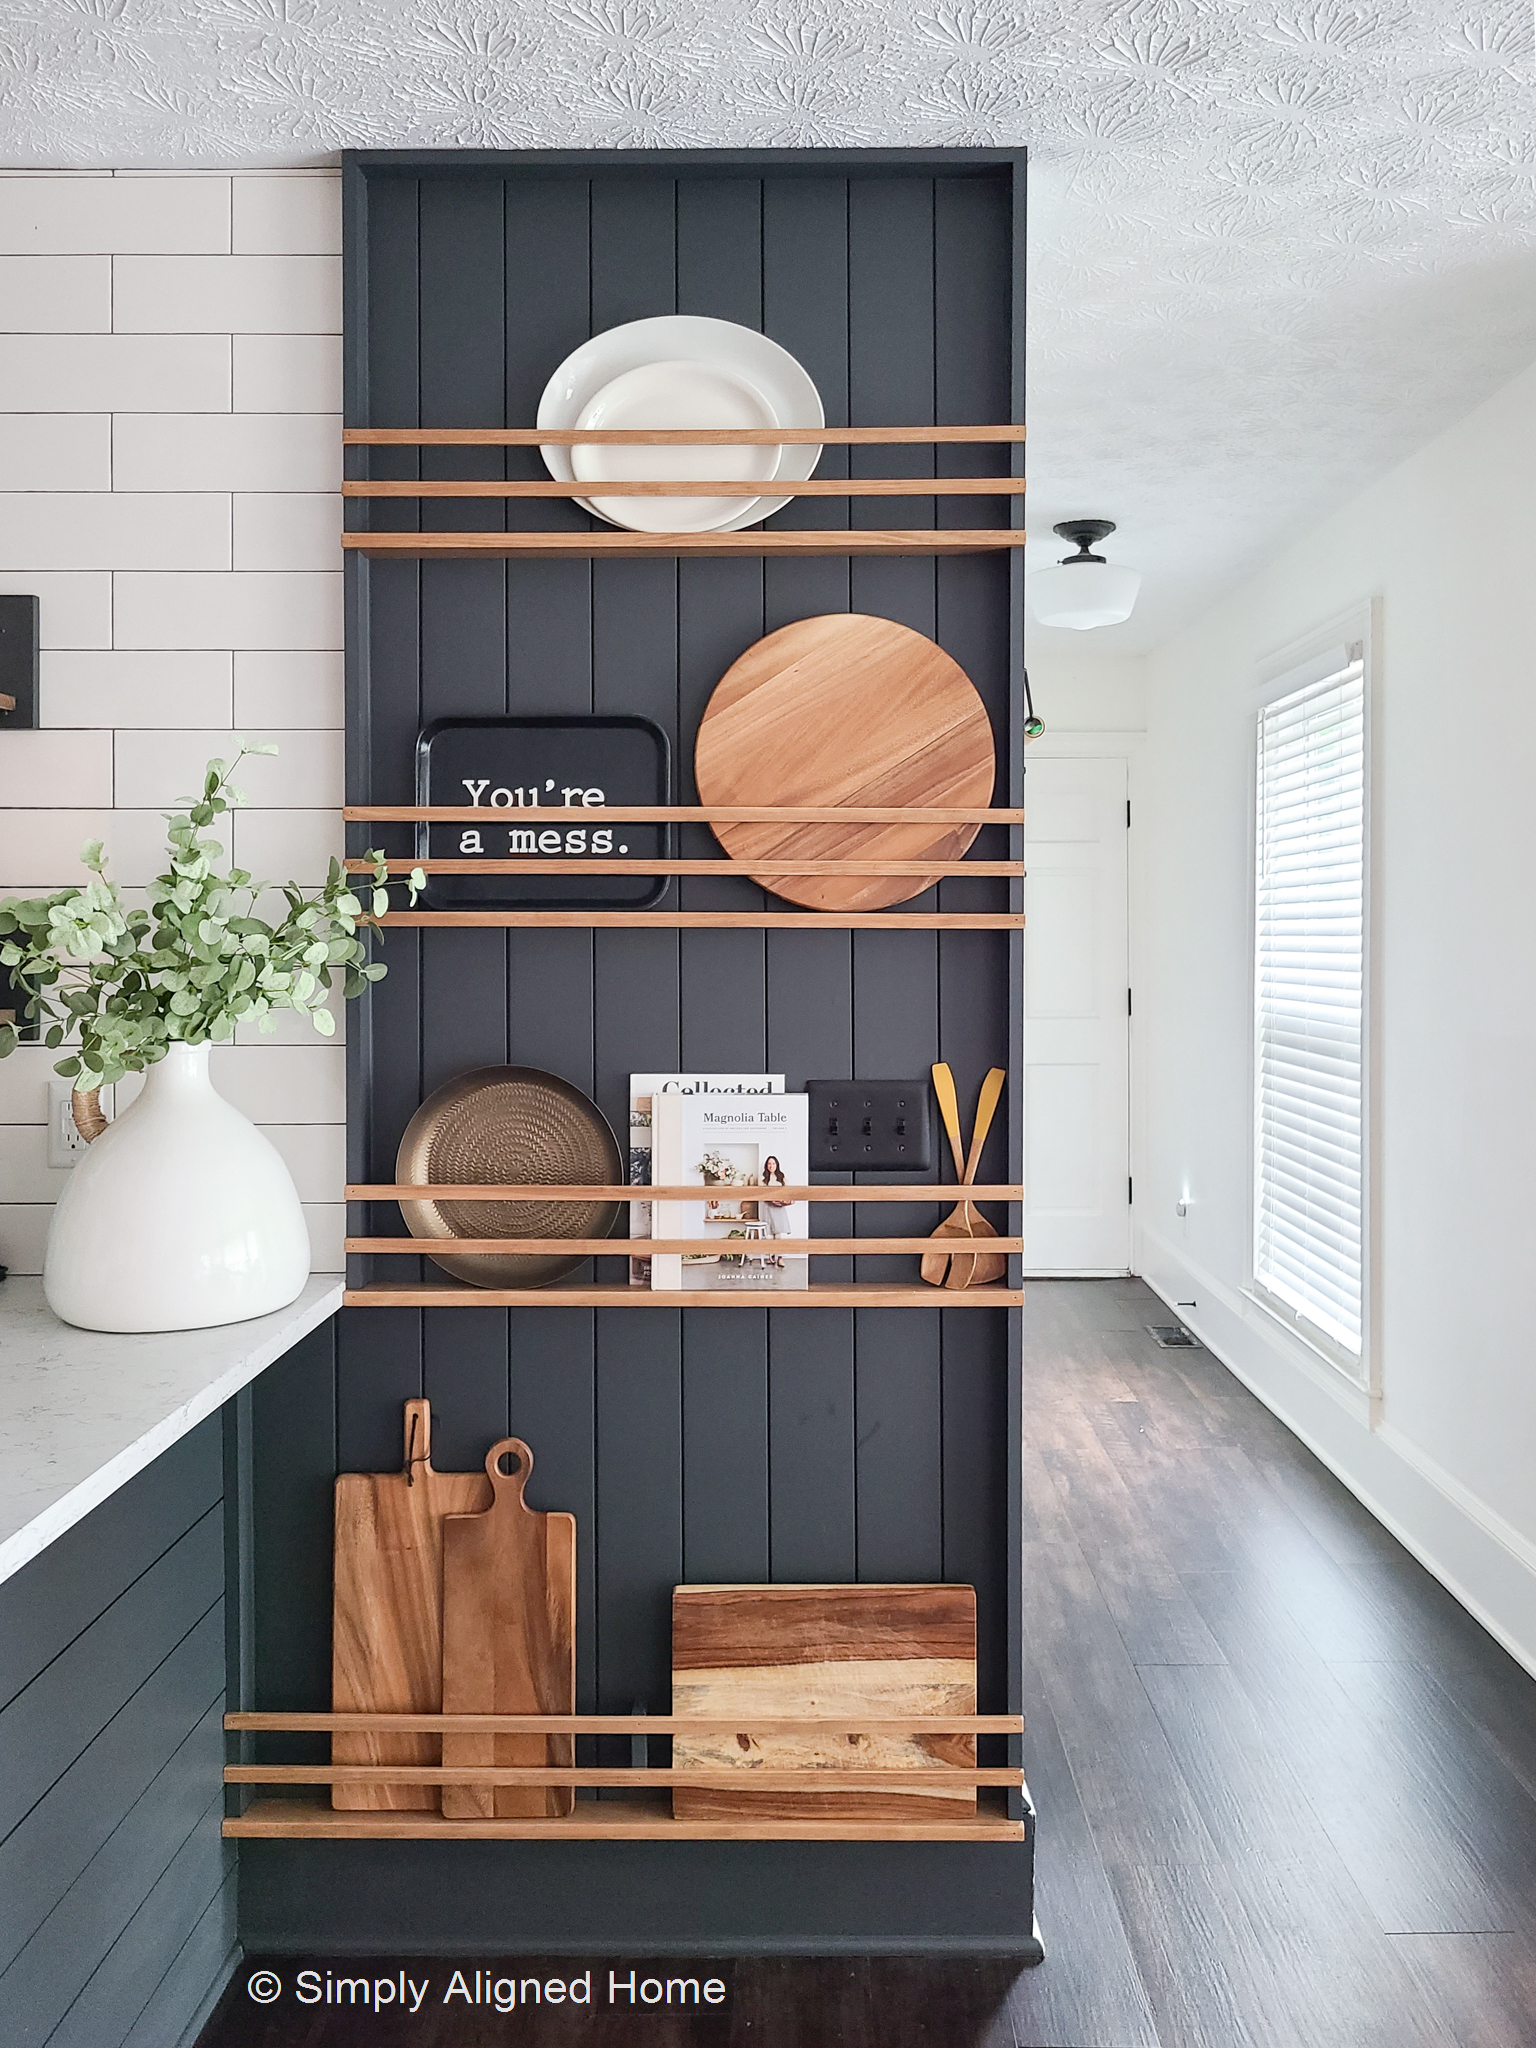 HOW TO MAKE A DIY SHIPLAP PLATE RACK - Simply Aligned Home